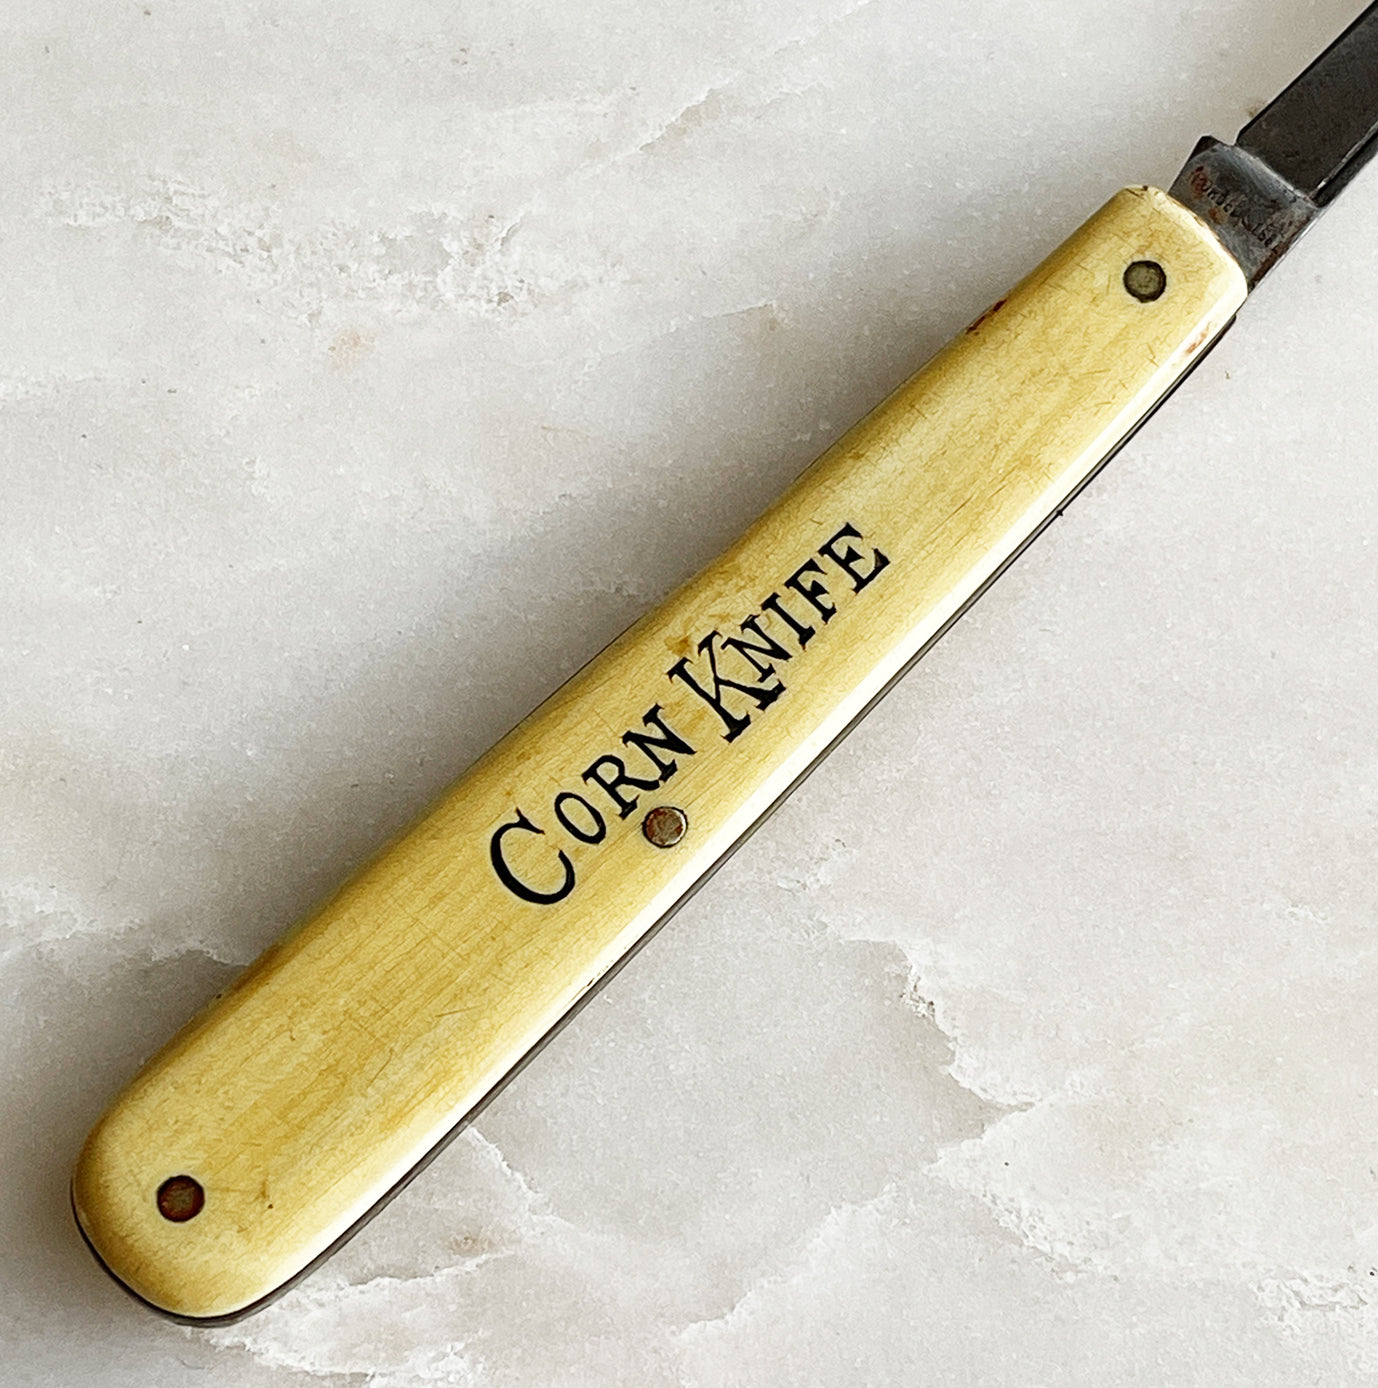 An Antique Waterfall celluloid handle scales, the front is etched CORN KNIFE. High carbon steel spey style blade with long nail pull and finger groove. Brass liners and handle pins. High quality antique pocket knife. Superb condition with a nice patina - SHOP NOW - www.intovintage.co.uk